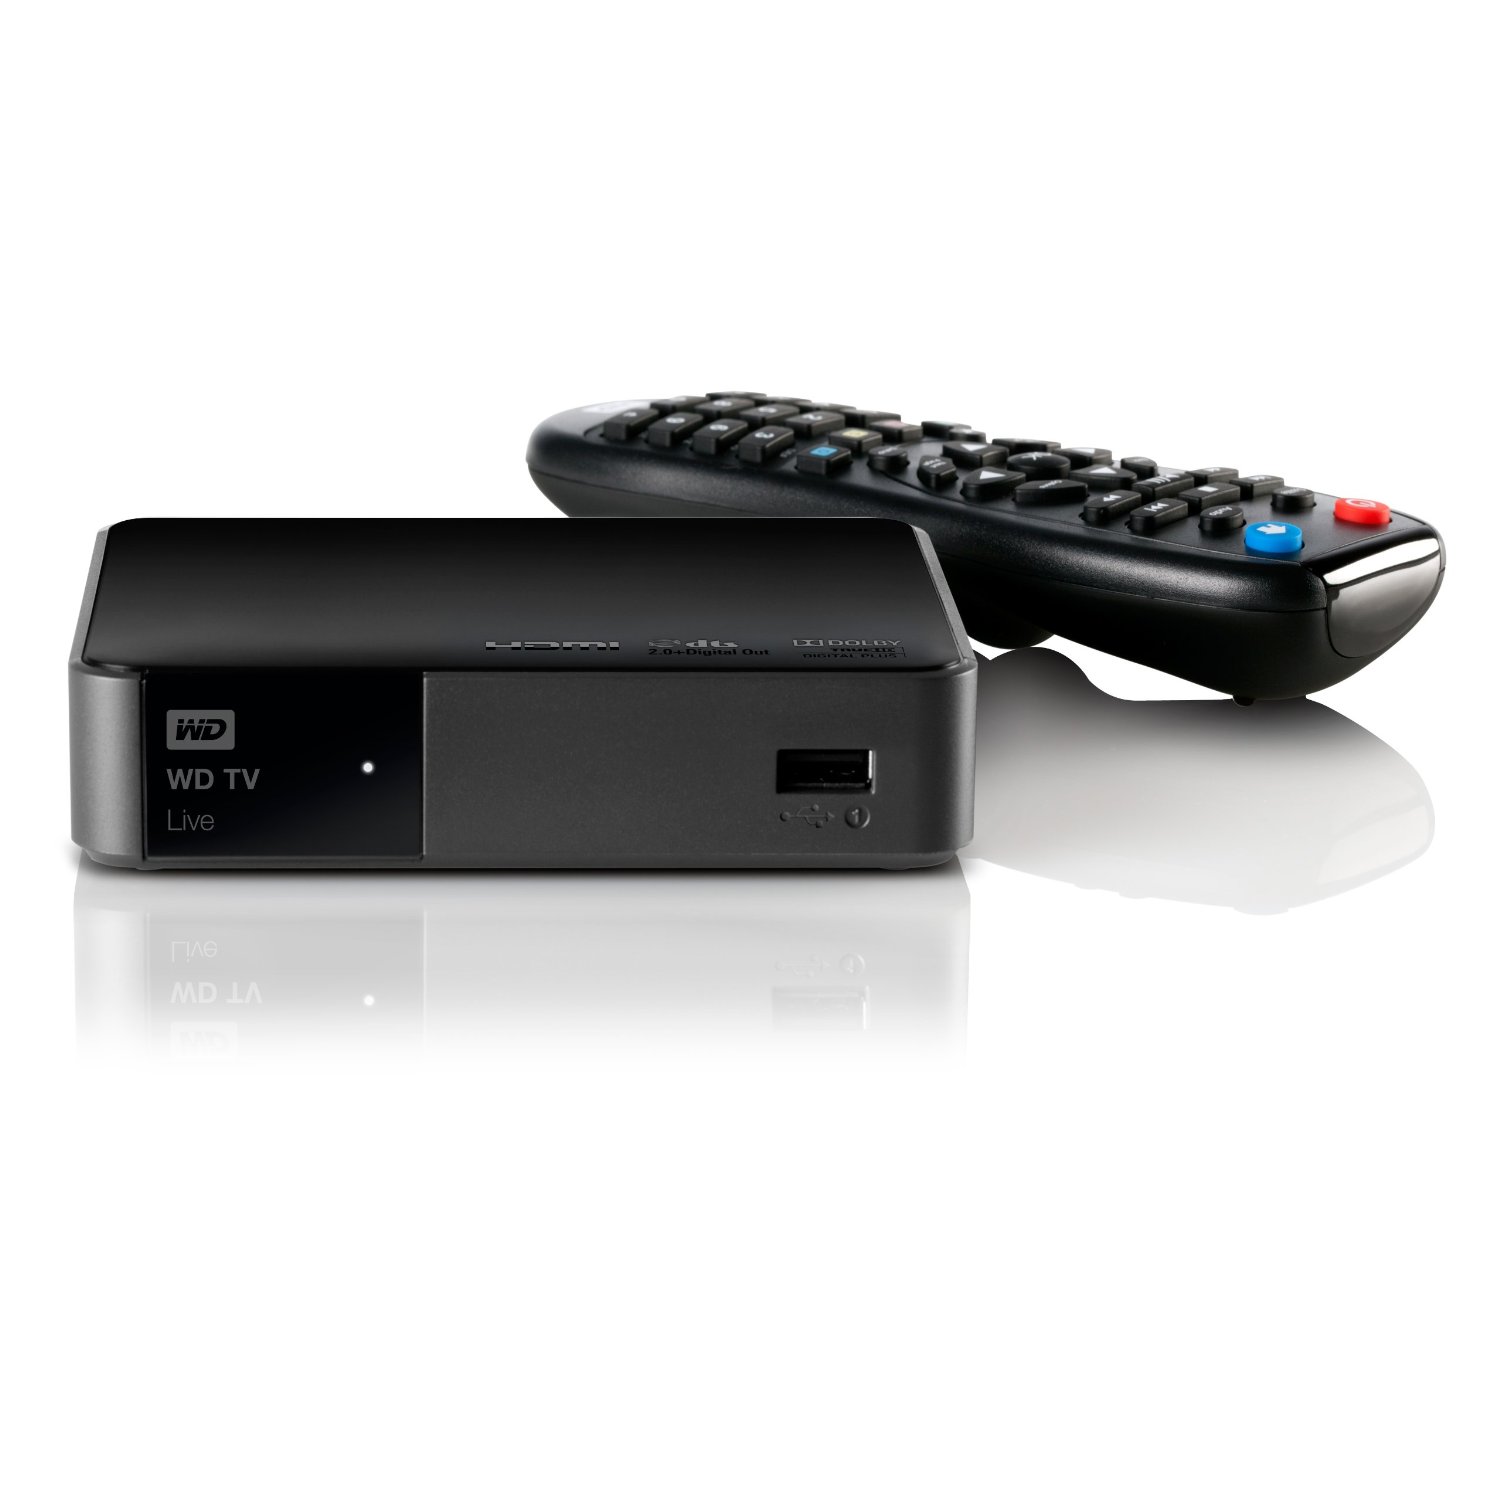 http://thetechjournal.com/wp-content/uploads/images/1110/1318016928-western-digital-wd-tv-live-streaming-media-player-1.jpg